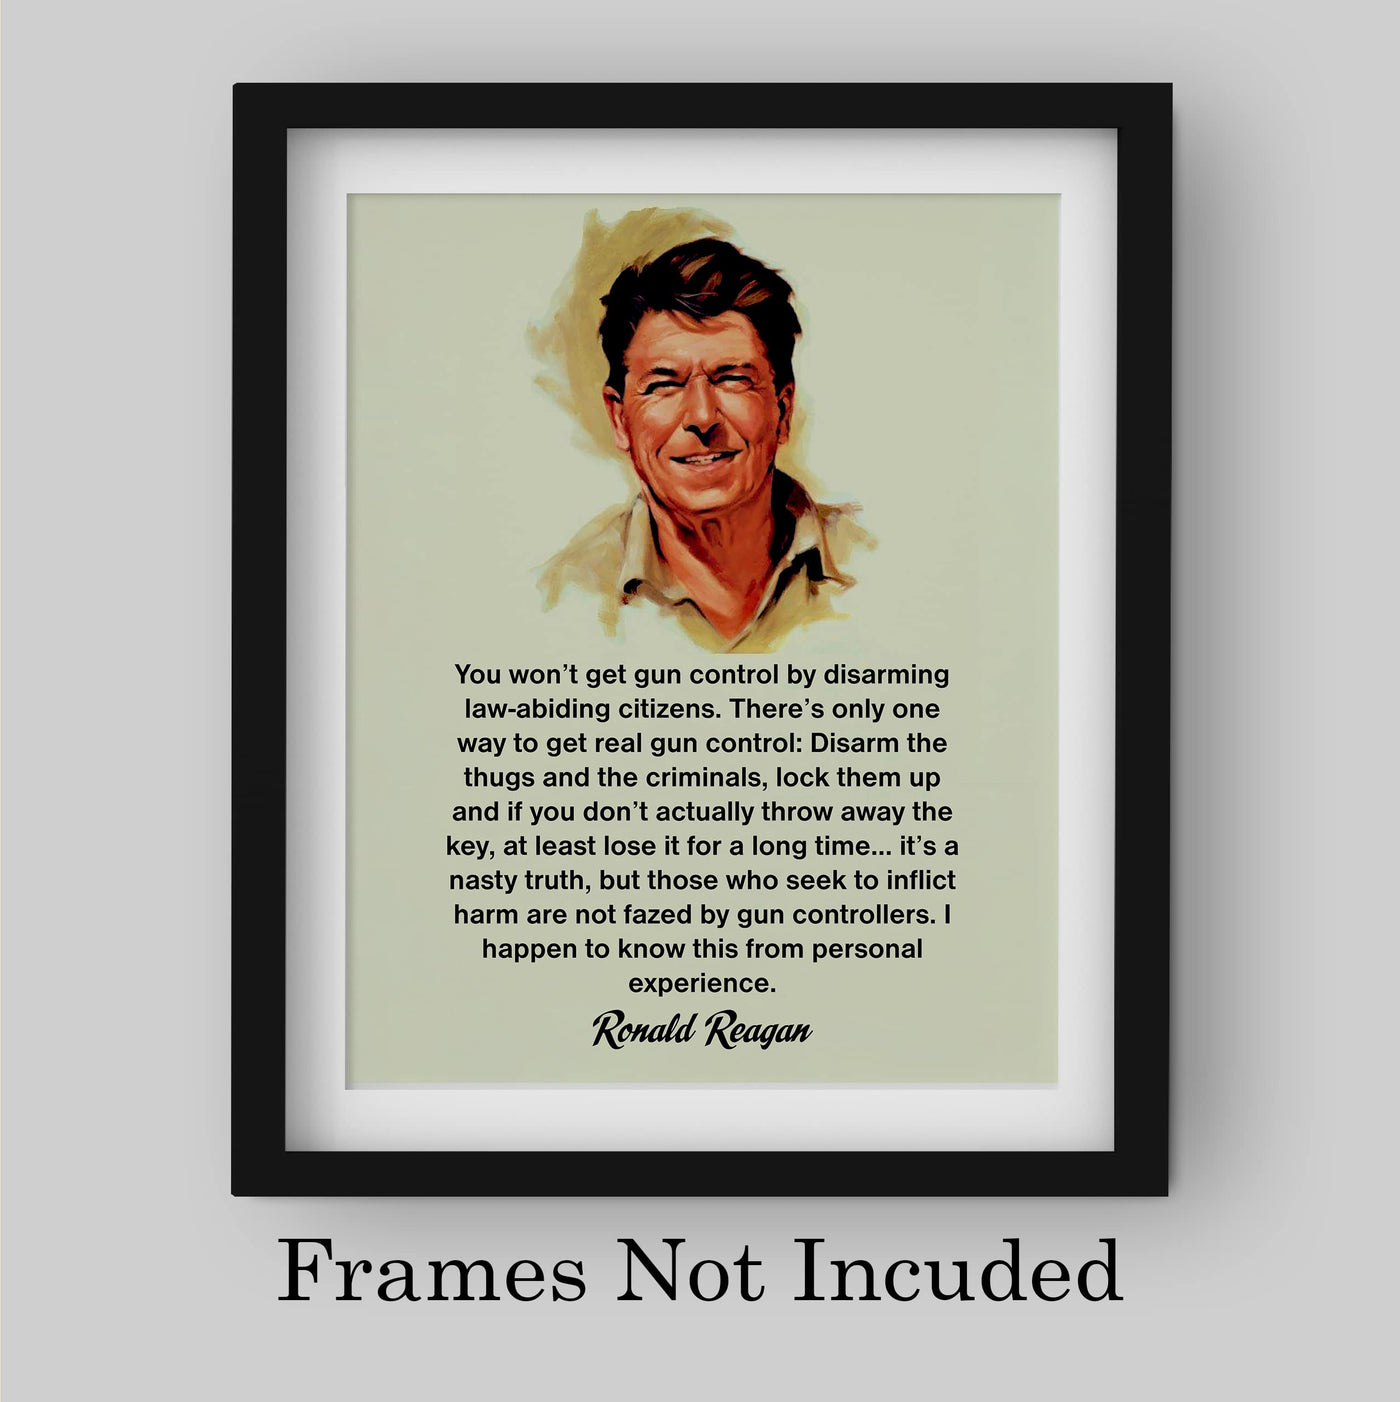 Ronald Reagan Quotes"Only One Way to Get Real Gun Control" -8 x 10" Presidential Portrait Wall Art Print -Ready to Frame. Modern Home-Office-Classroom Decor. Perfect Inspirational-Patriotic Gift.